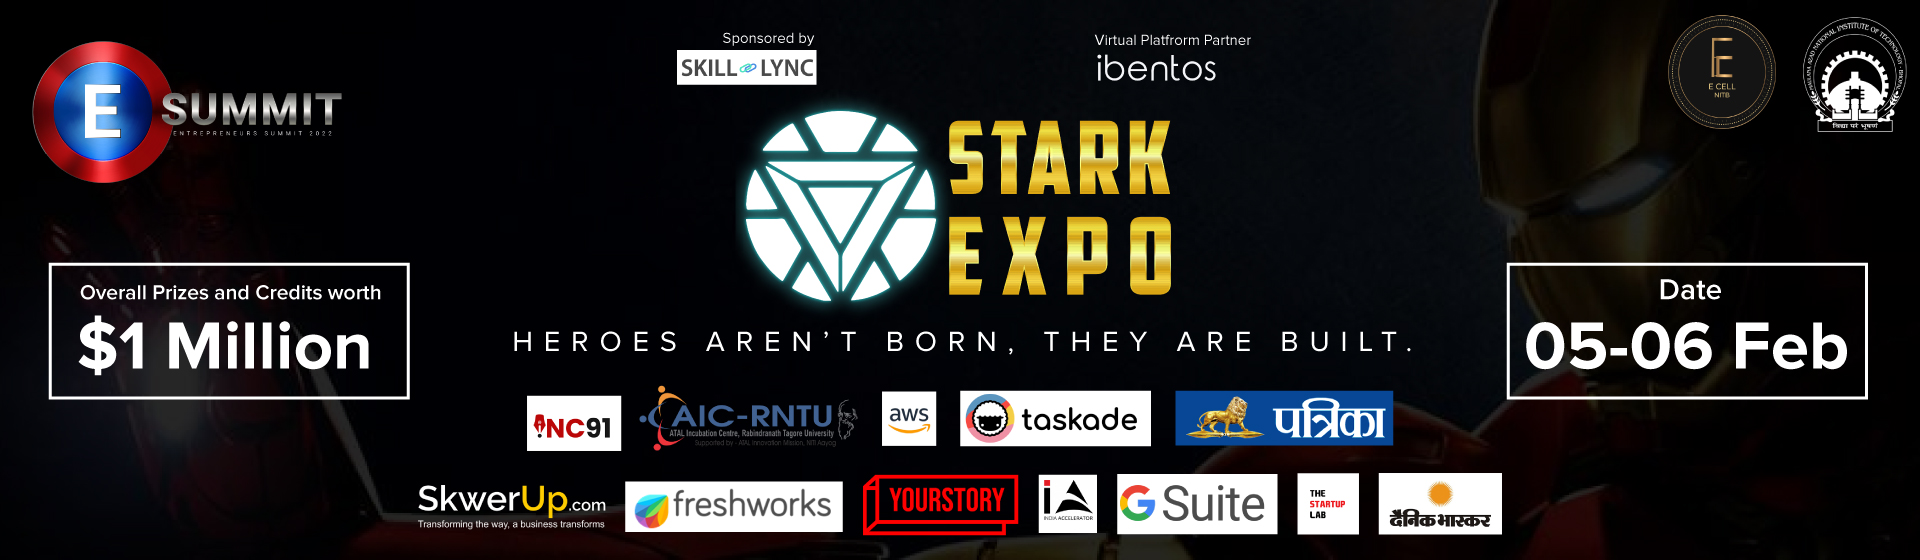 StarkExpo - Central India’s Largest Startup Expo, Online Event